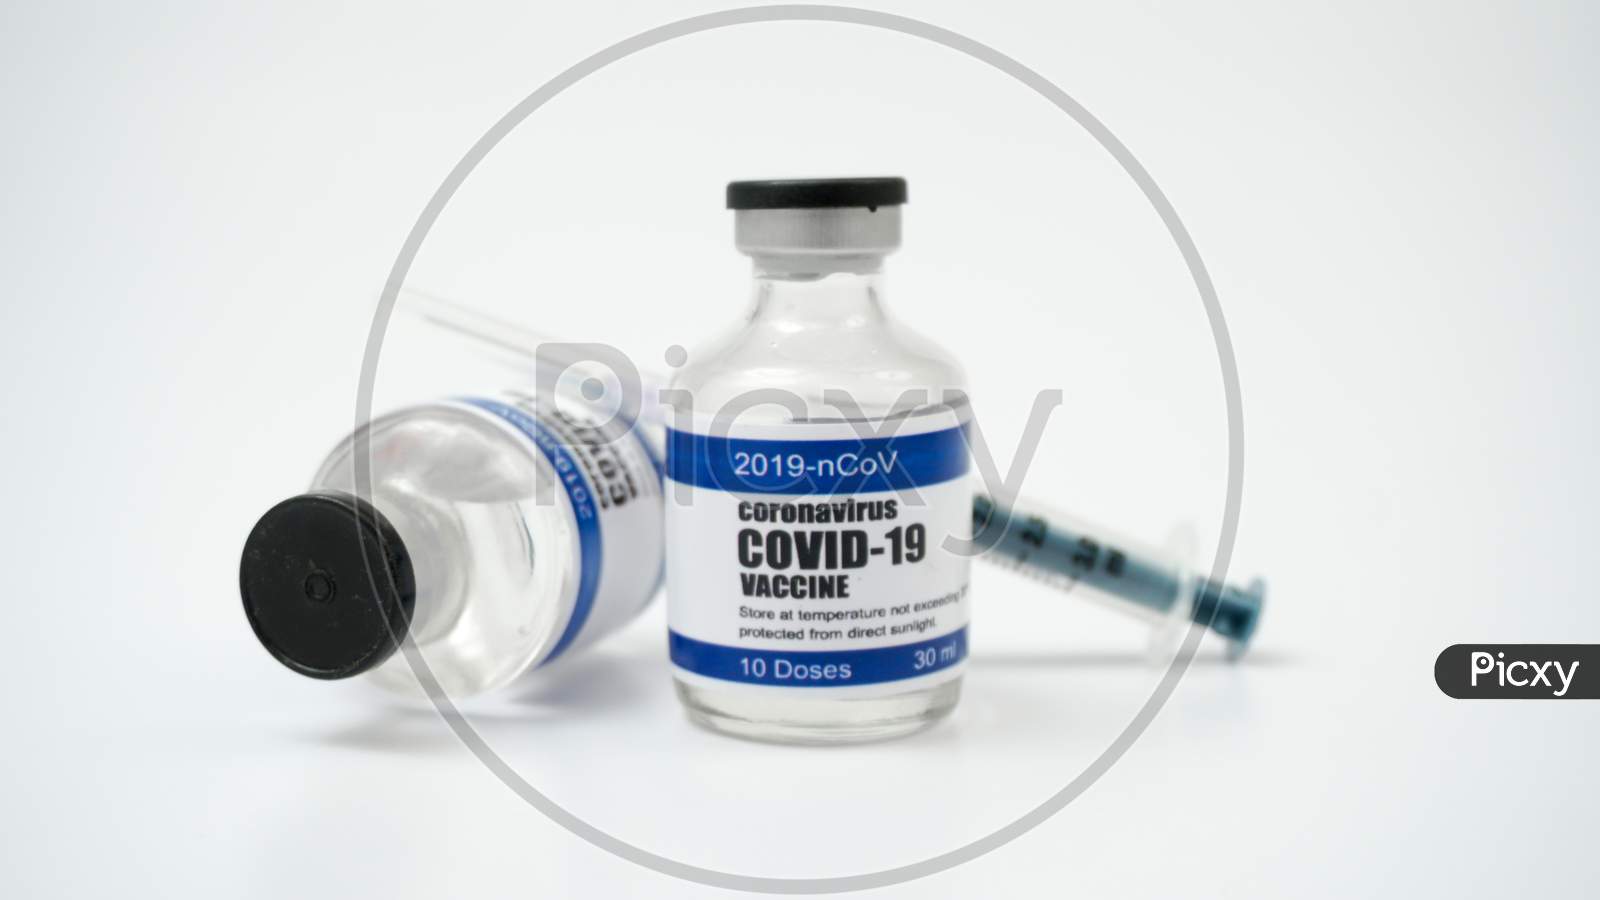 Covid-19 Corona Virus 2019-Ncov Vaccine Vials Medicine Drug Bottles Syringe Injection. Vaccination, Immunization, Treatment To Cure Covid 19 Corona Virus Infection. Healthcare And Medical Concept.